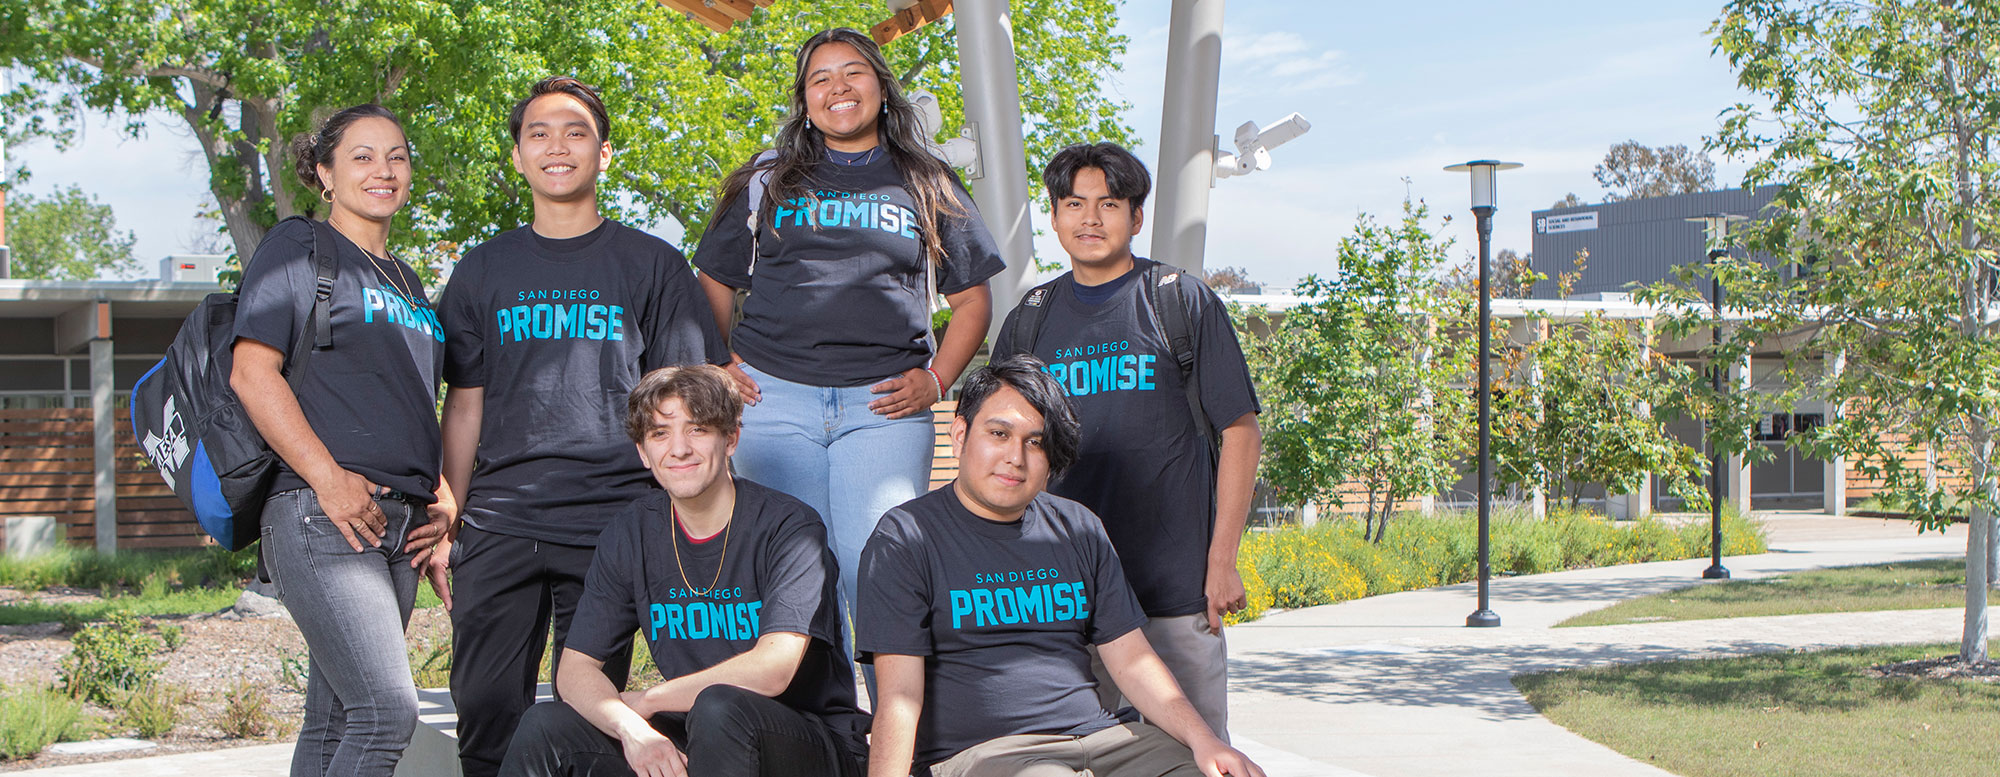 Six students wearing promise t shirts are outside on a bench in the Mesa Quad with greenery in the background.